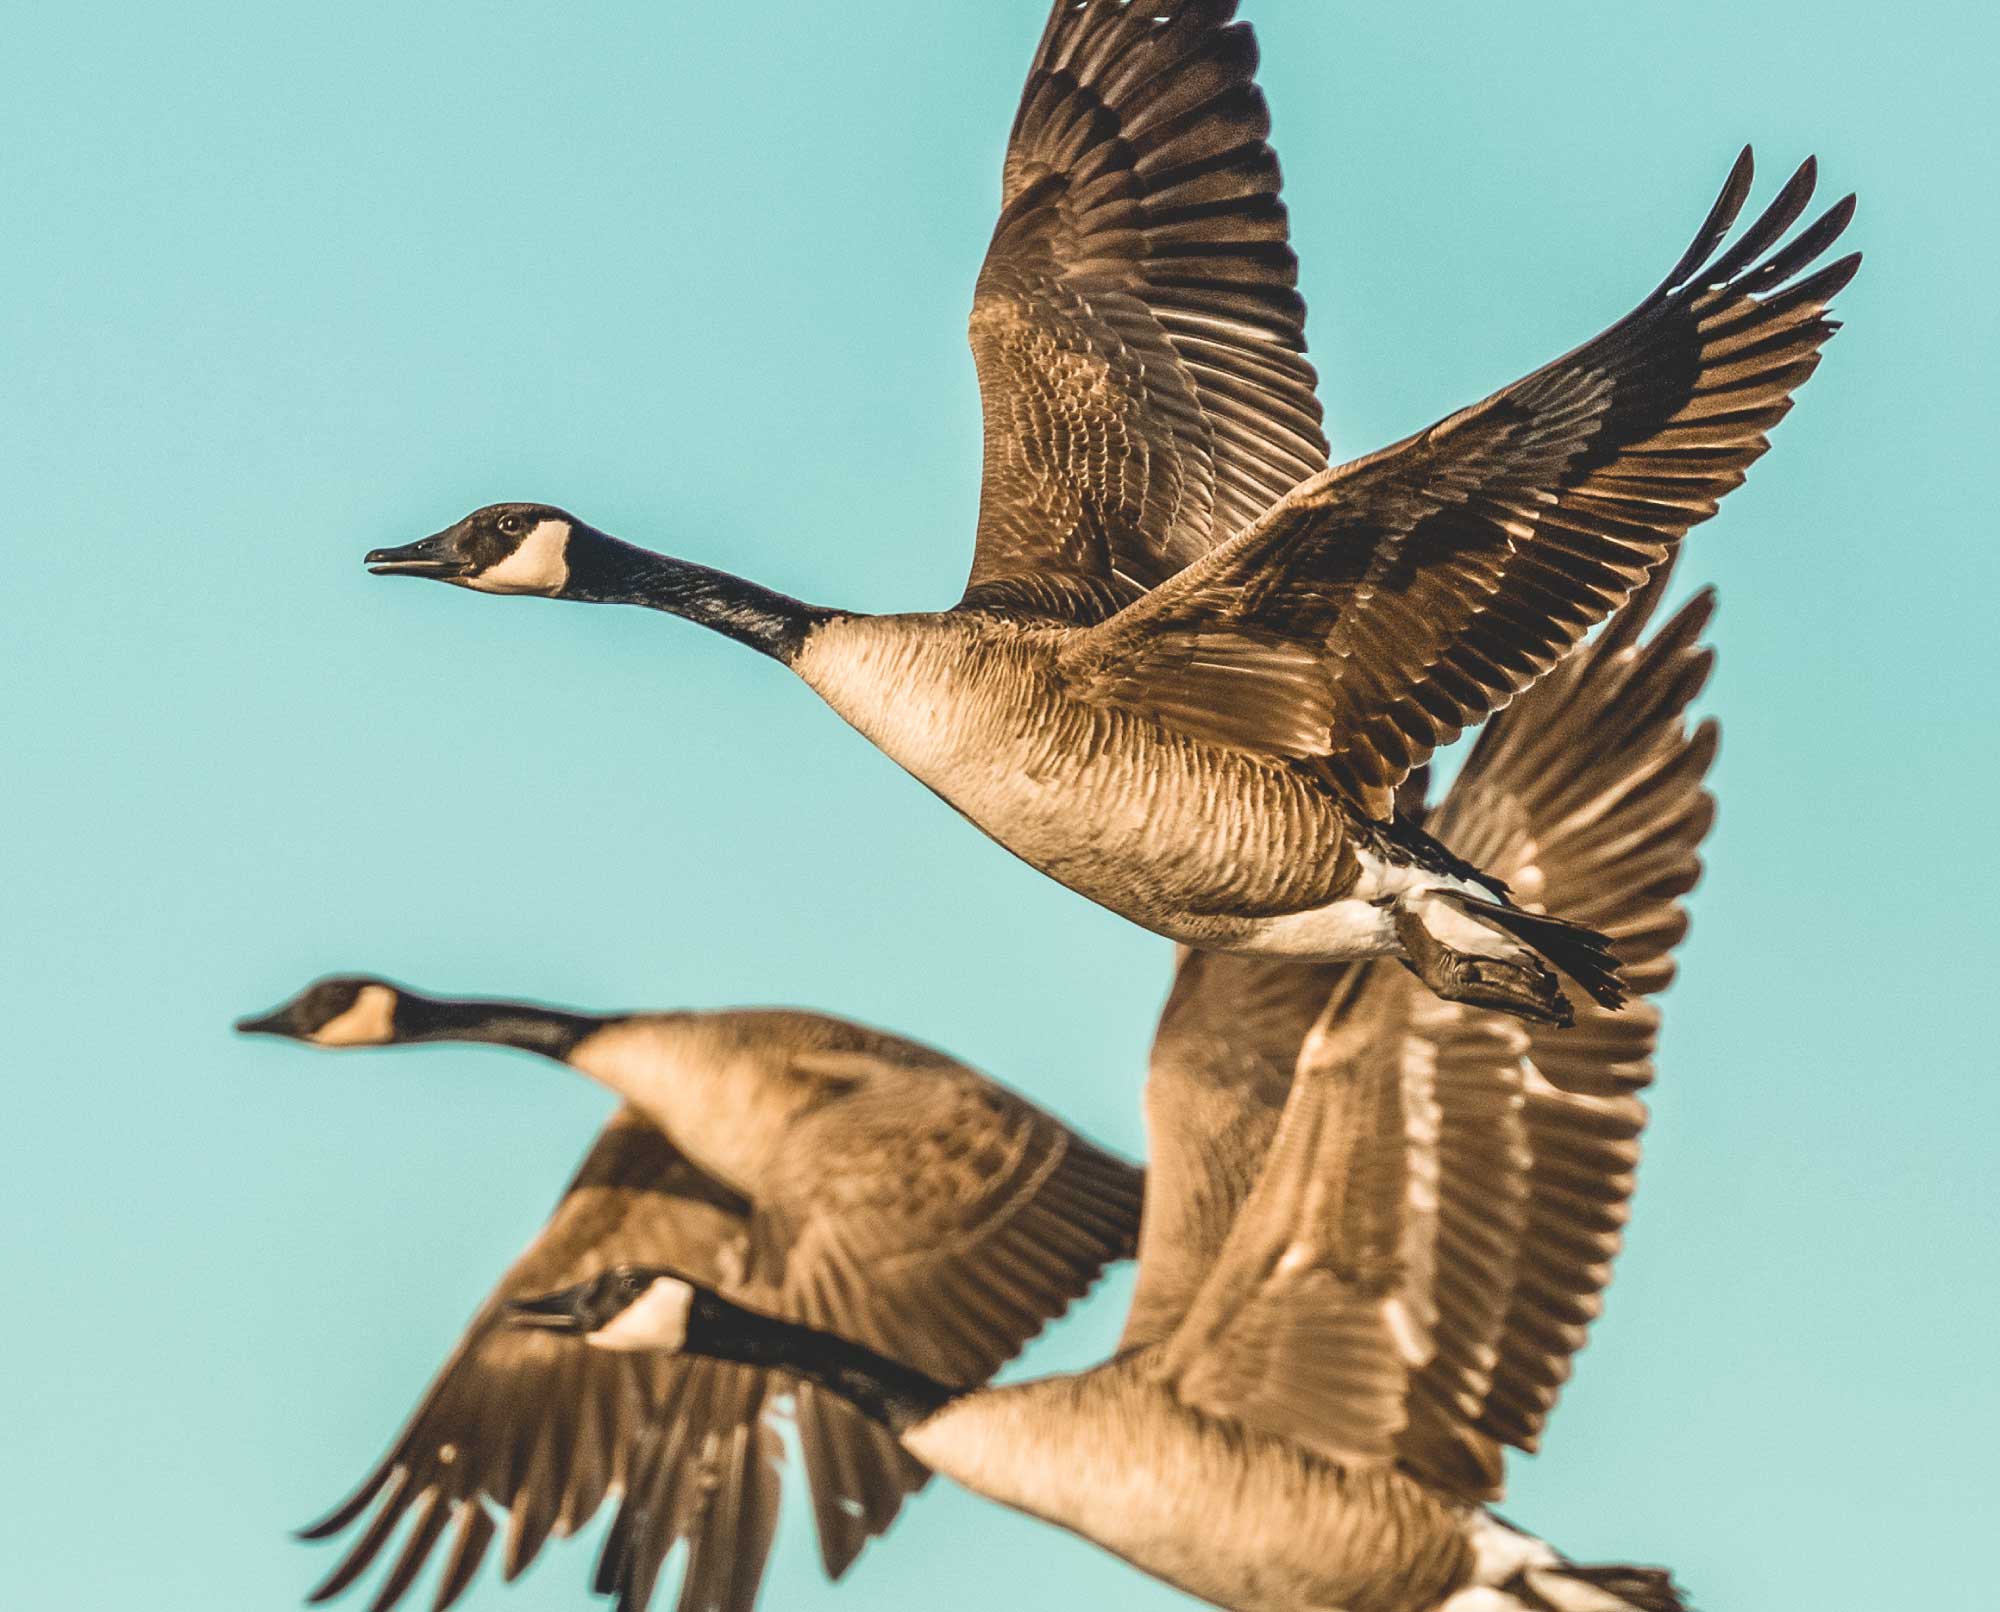 A pair of Canada geese in flight